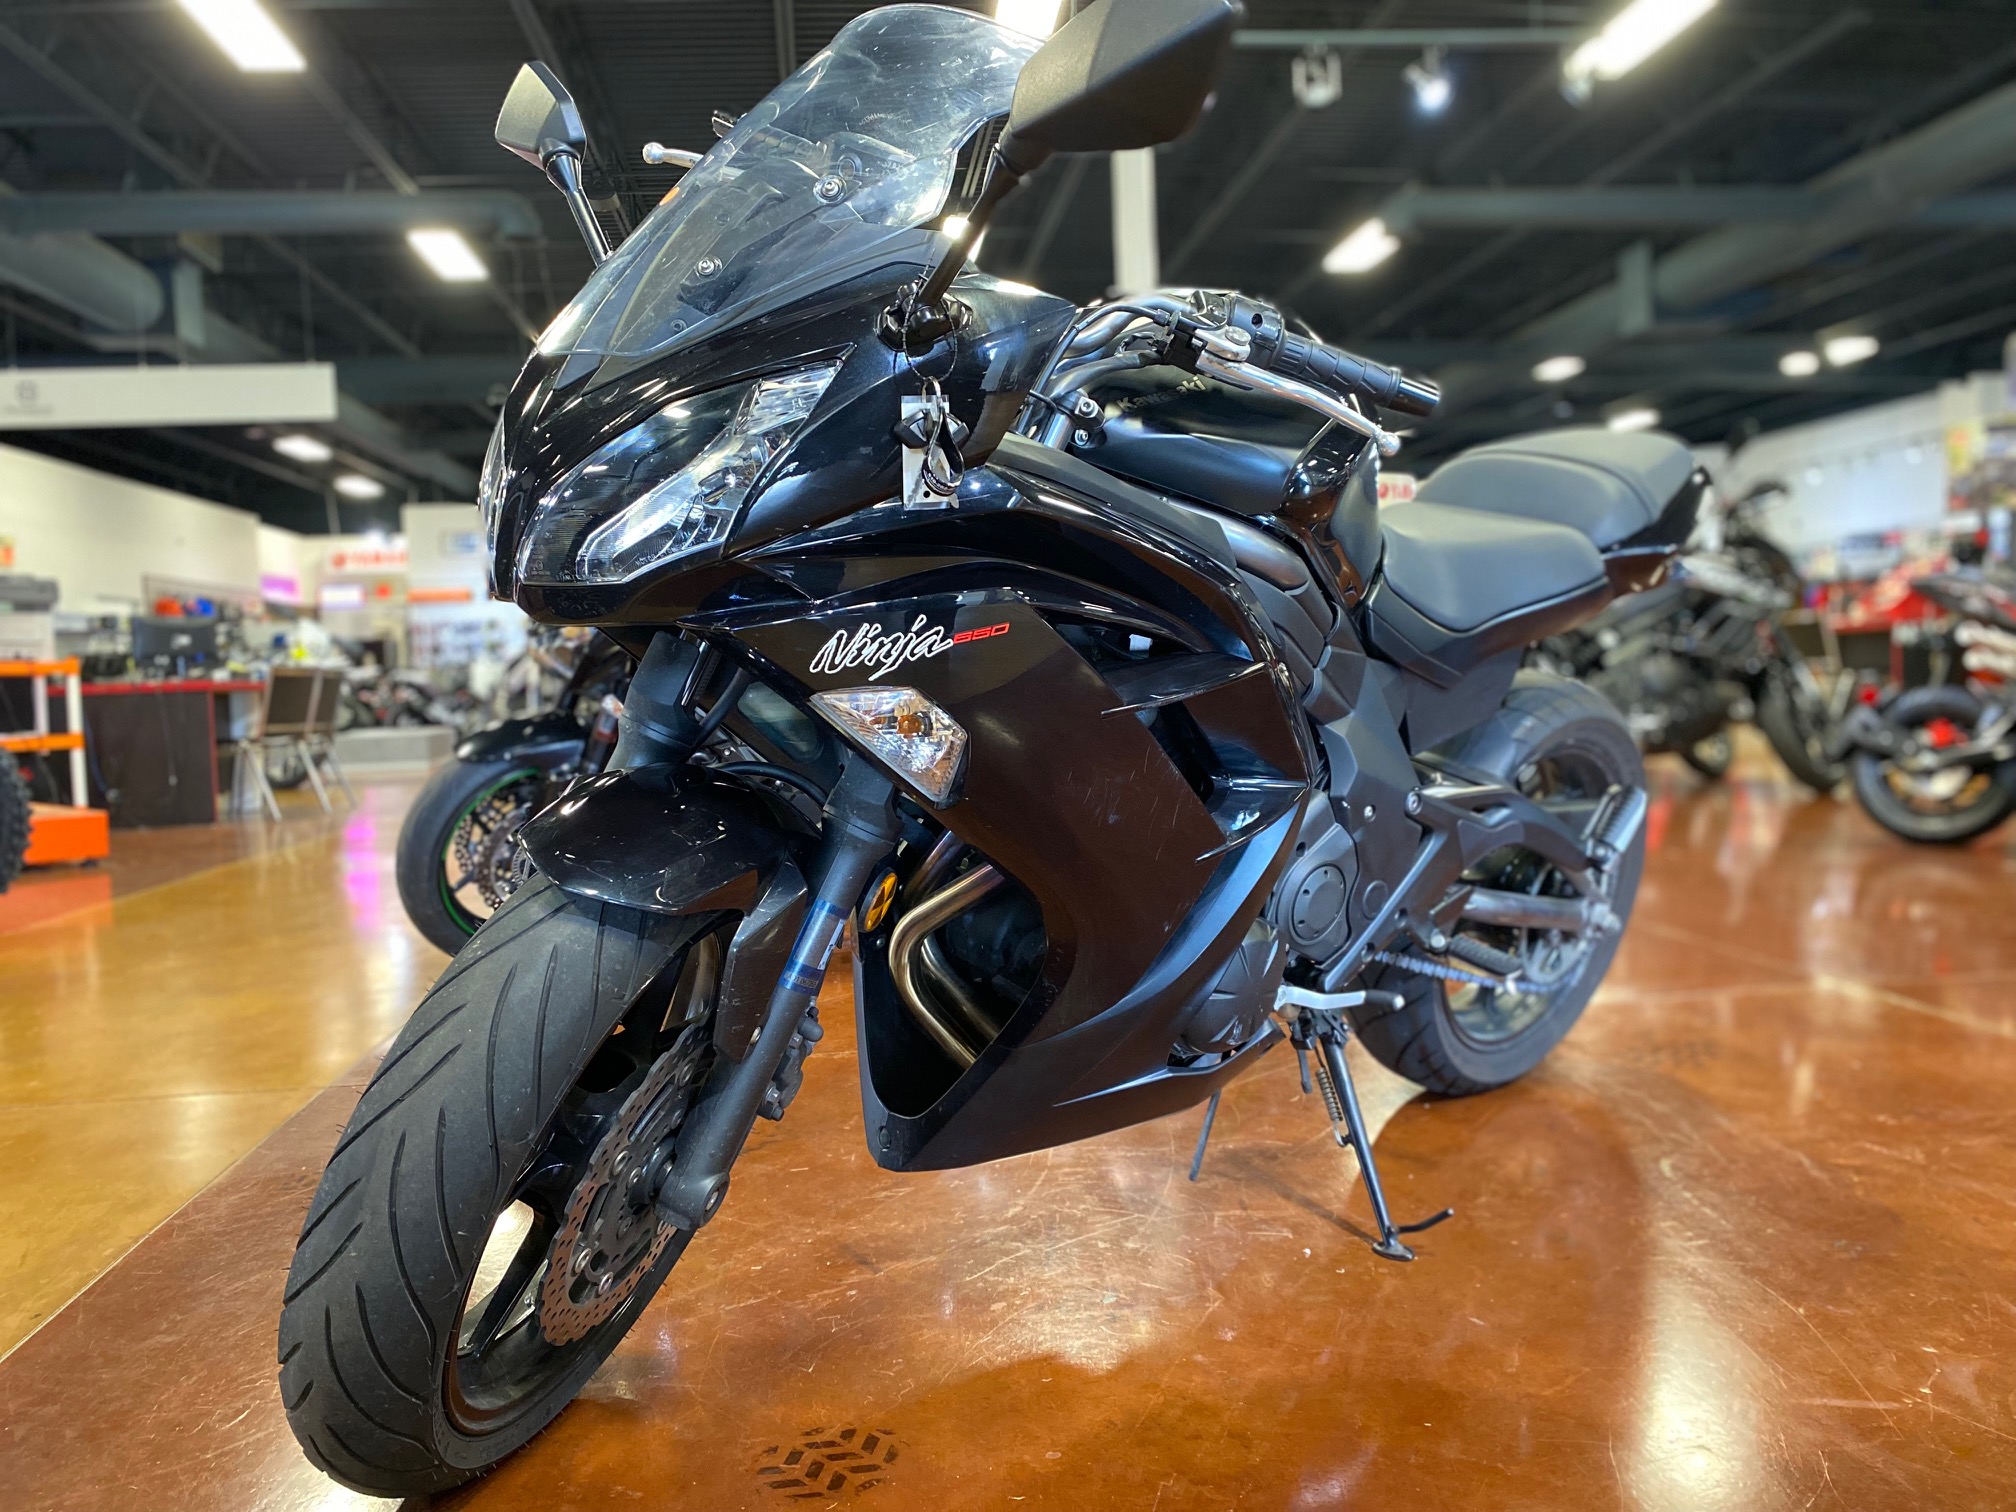 Pre-Owned KAWASAKI For Scott Powersports Coopersburg PA